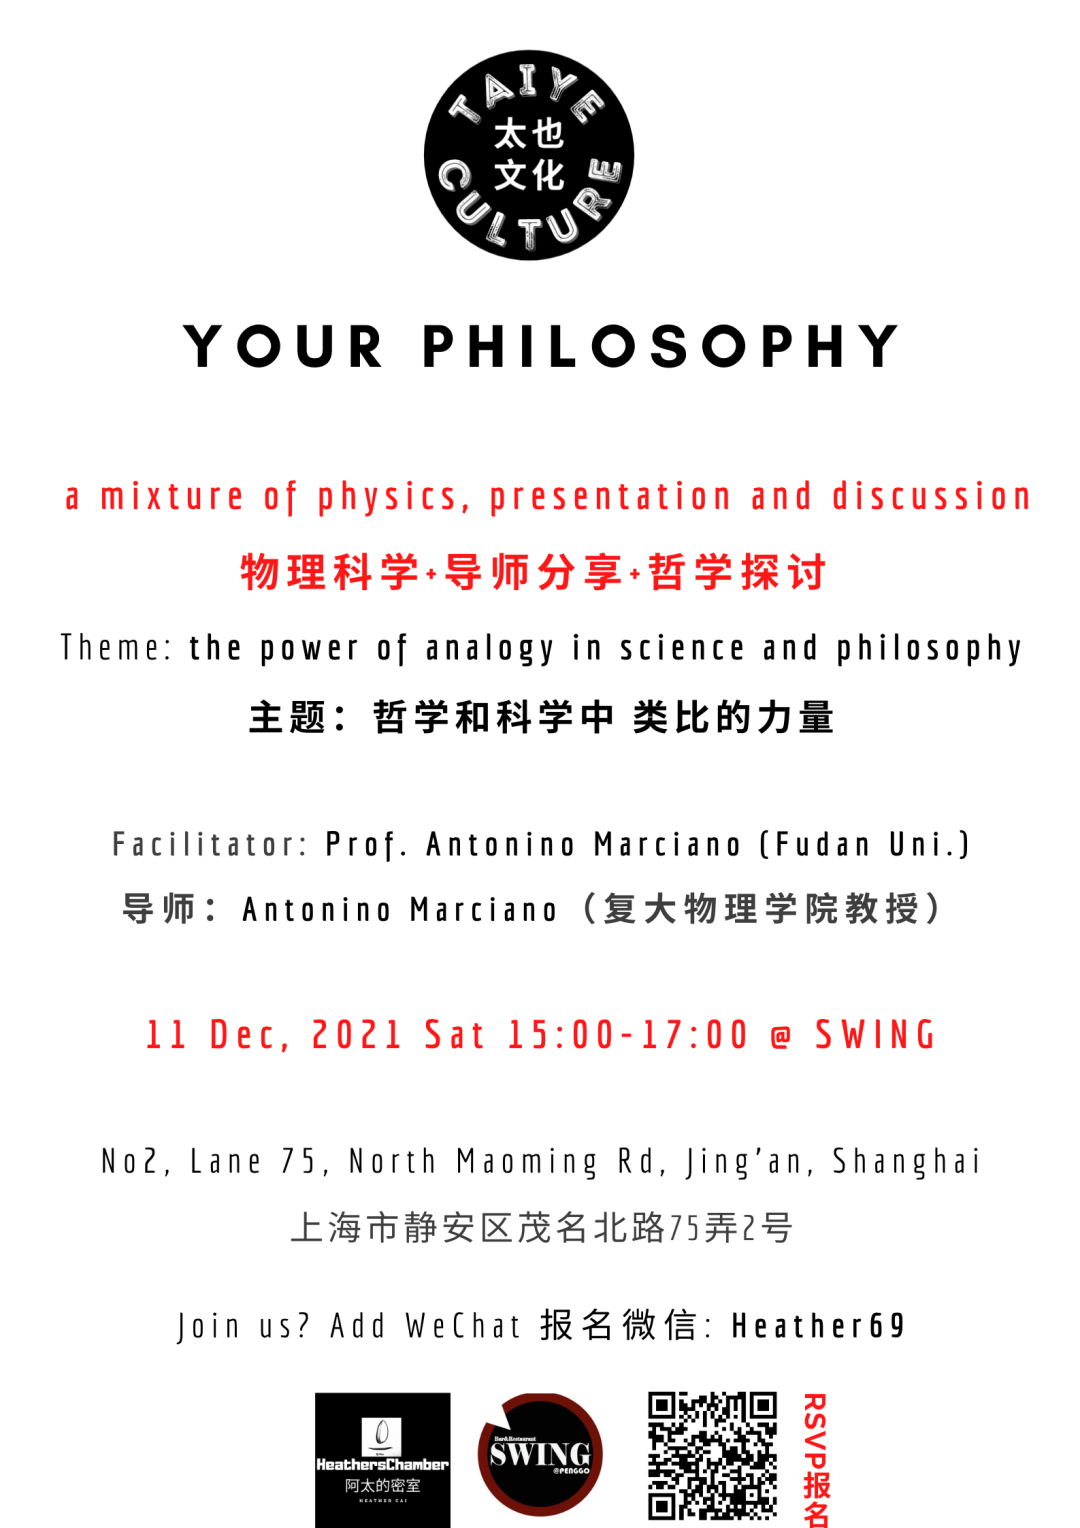 Your Philosophy | Shanghai Events